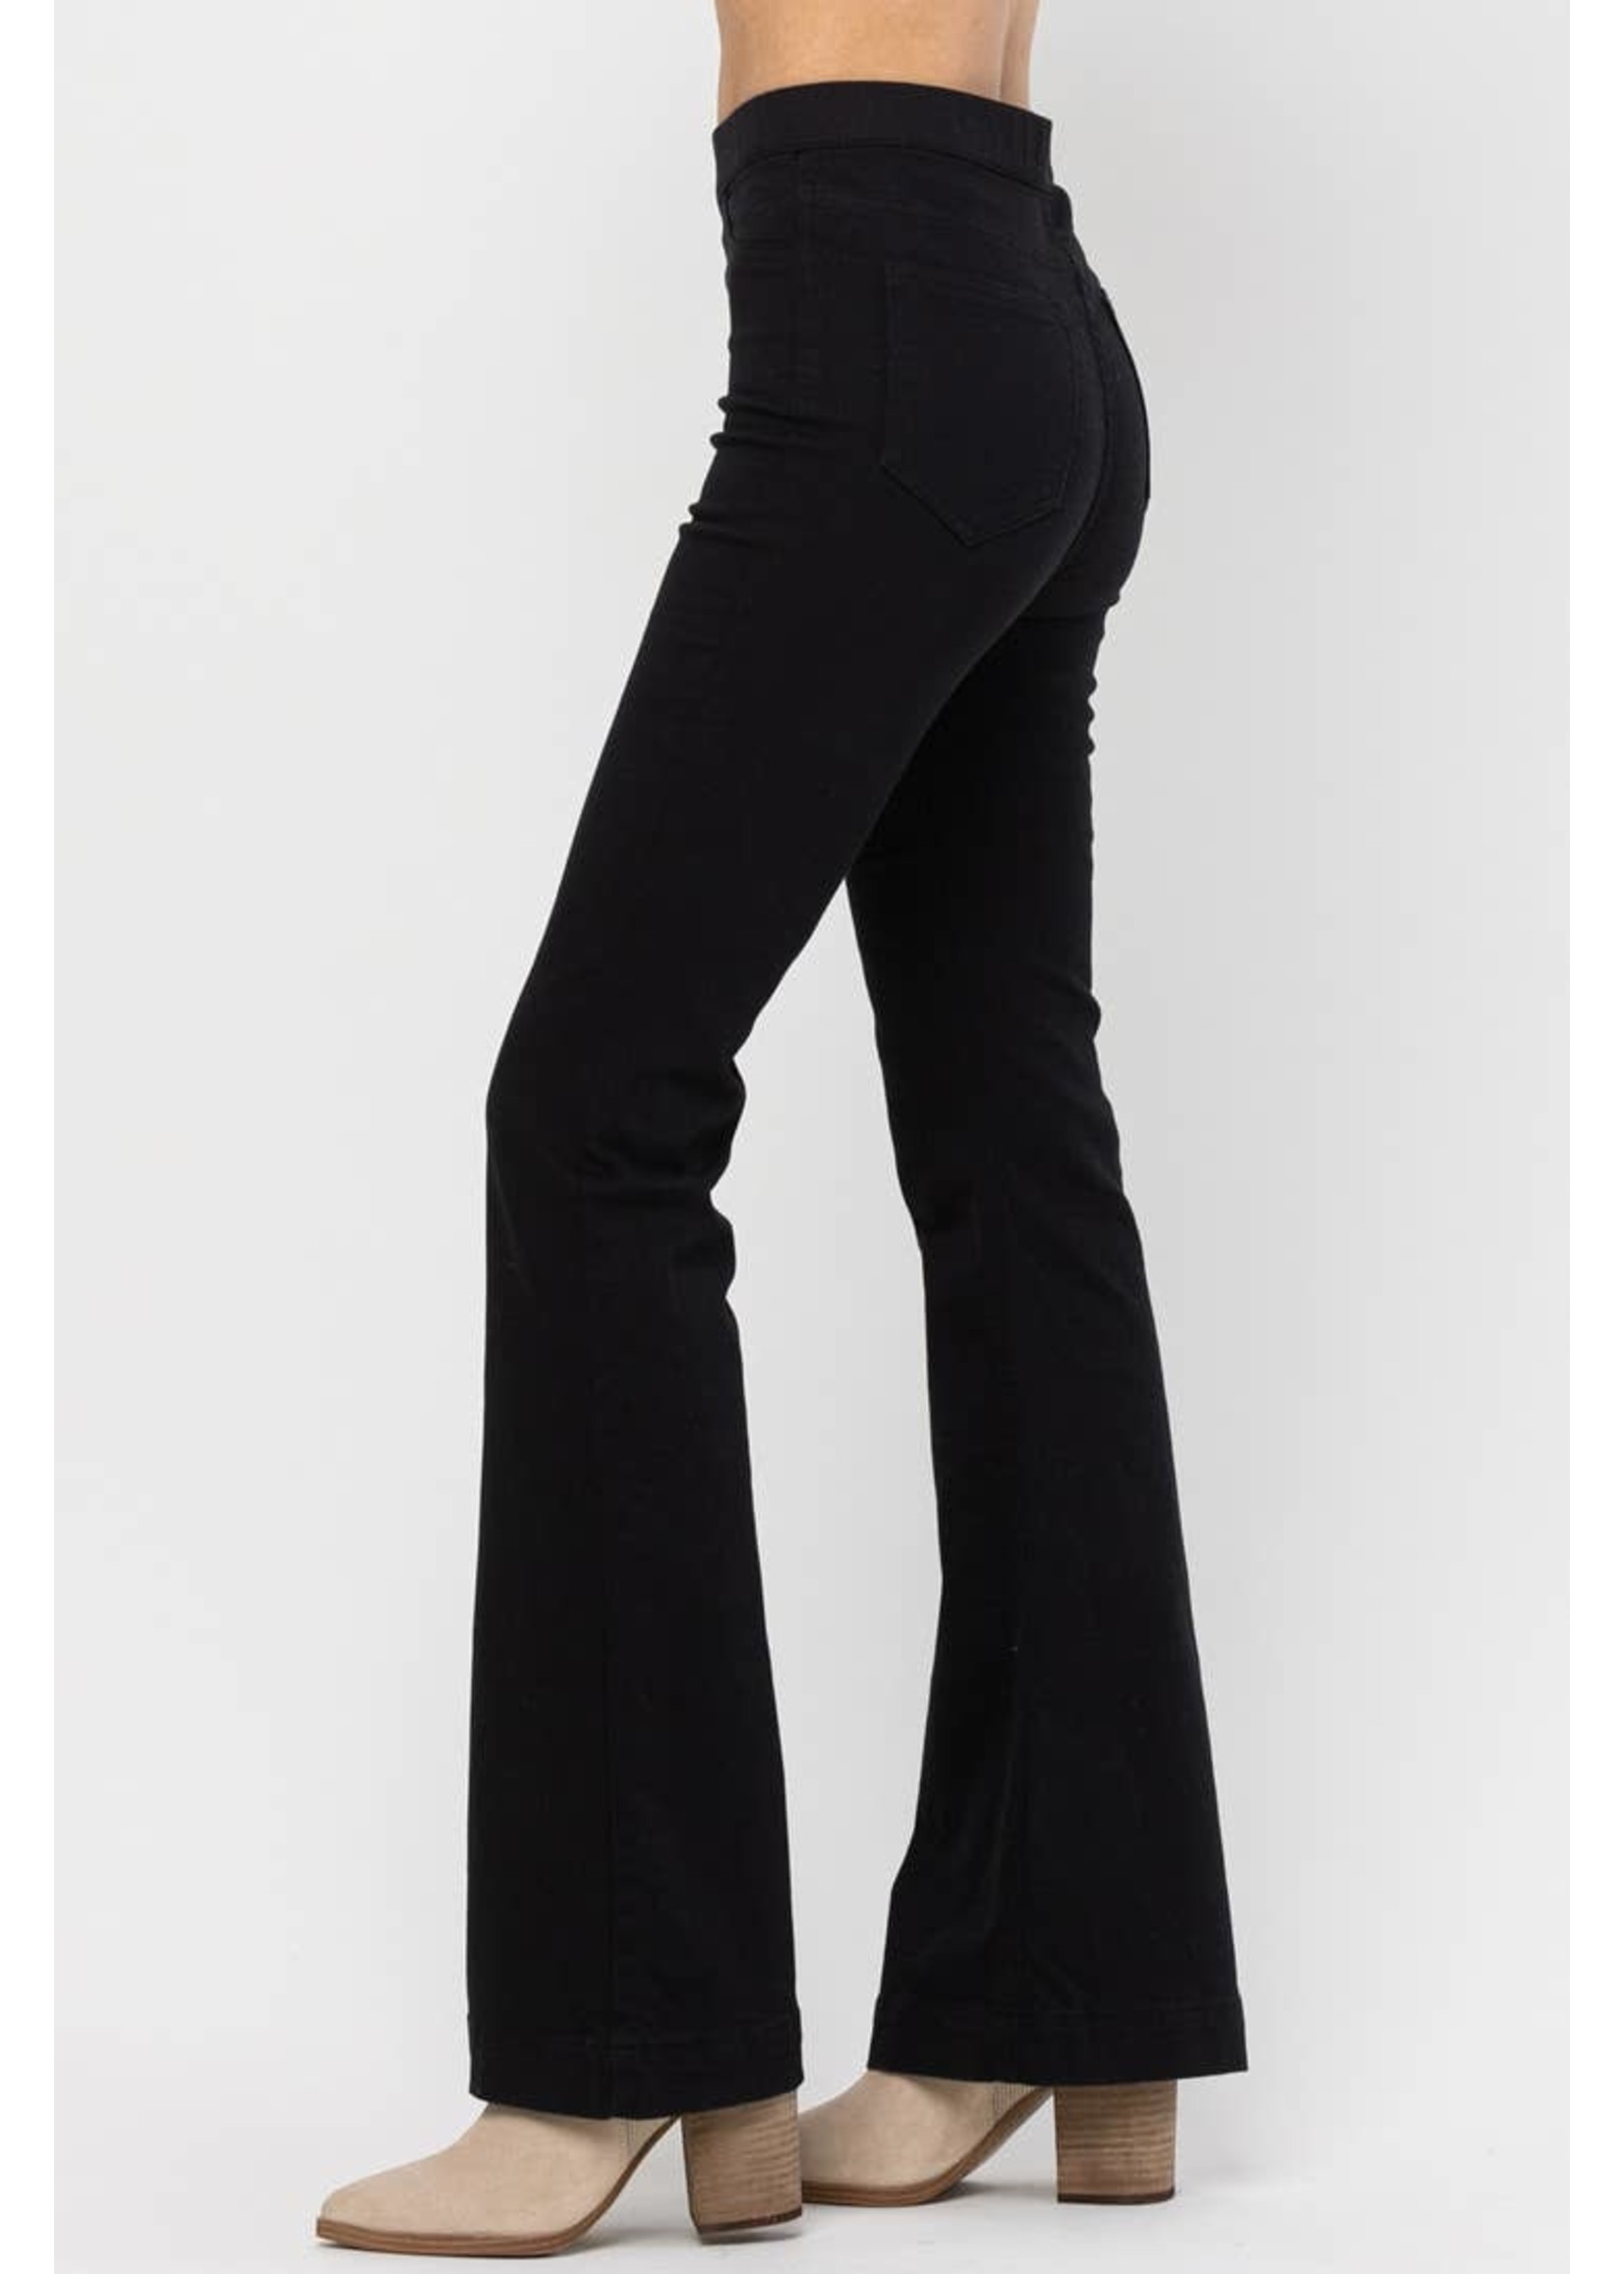 Jelly Jeans Black pull on flare